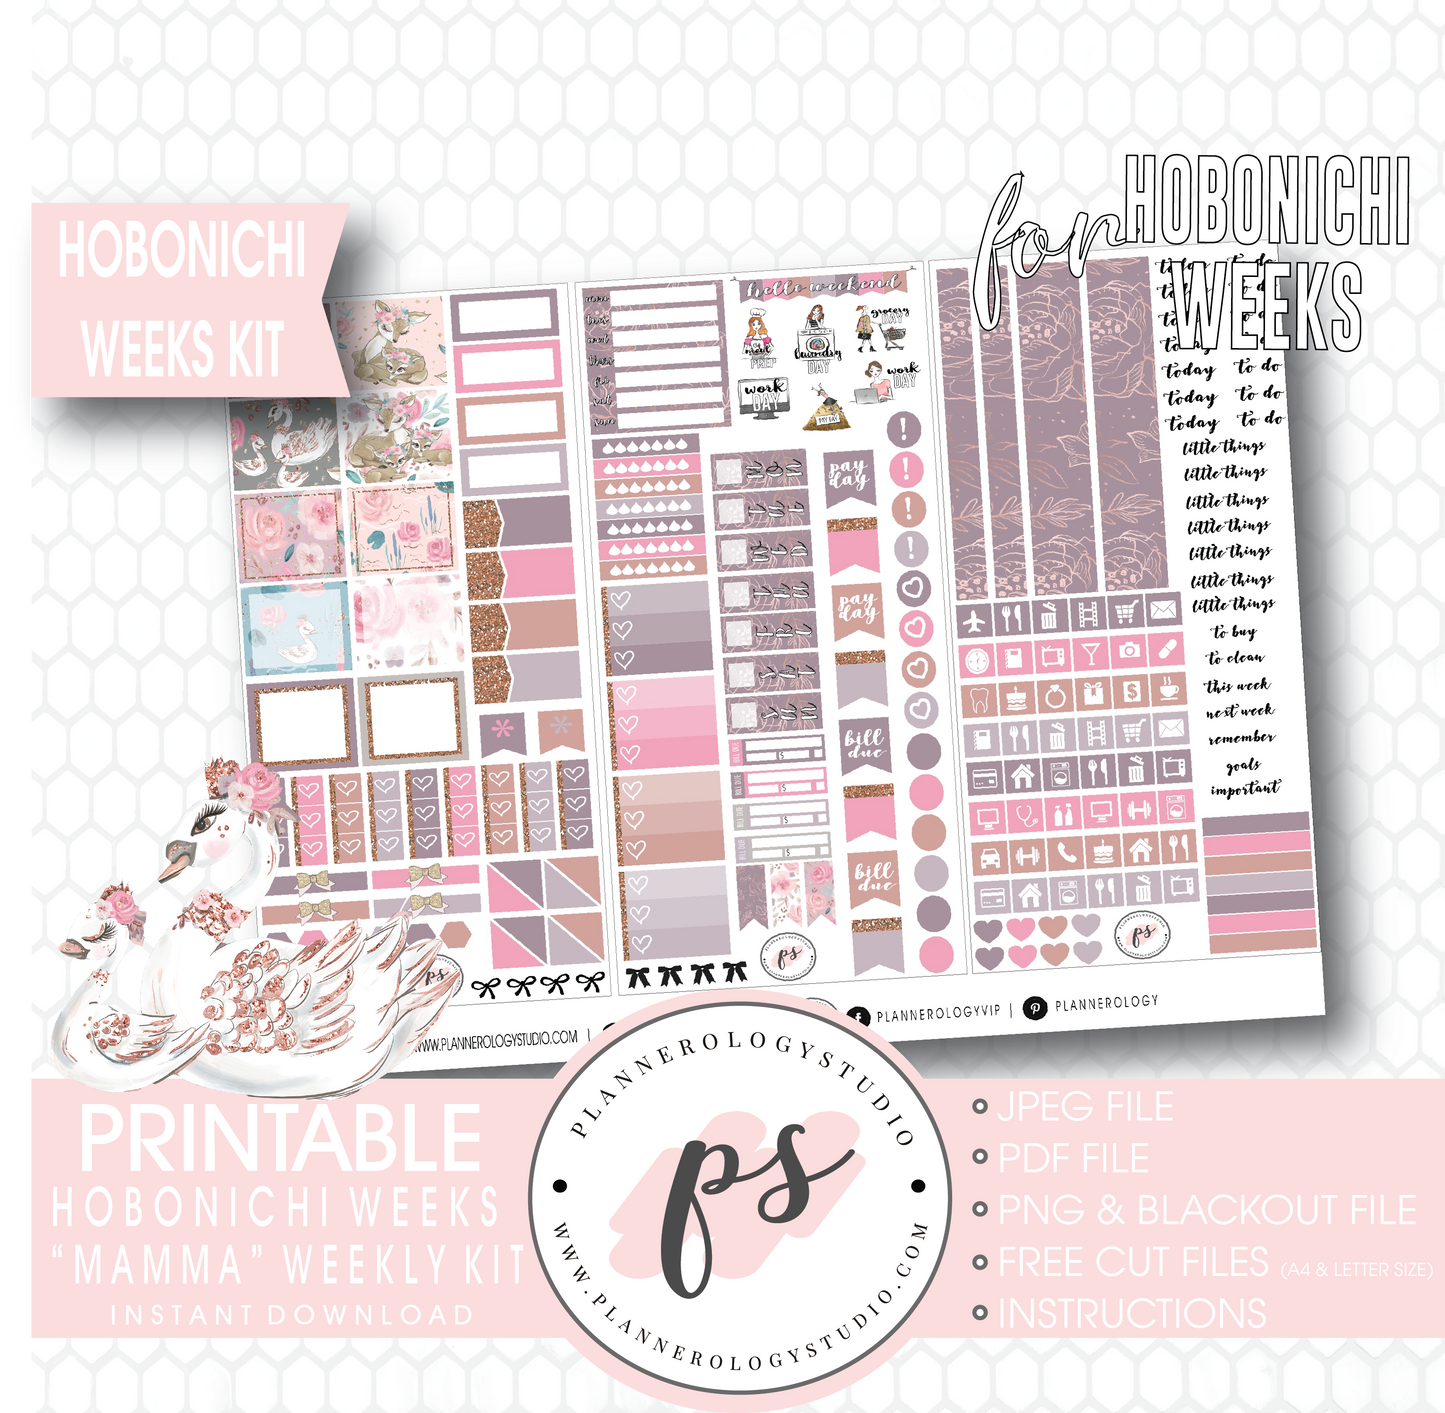 Mamma (Mother's Day) Weekly Kit Printable Digital Planner Stickers (for use with Hobonichi Weeks) - Plannerologystudio